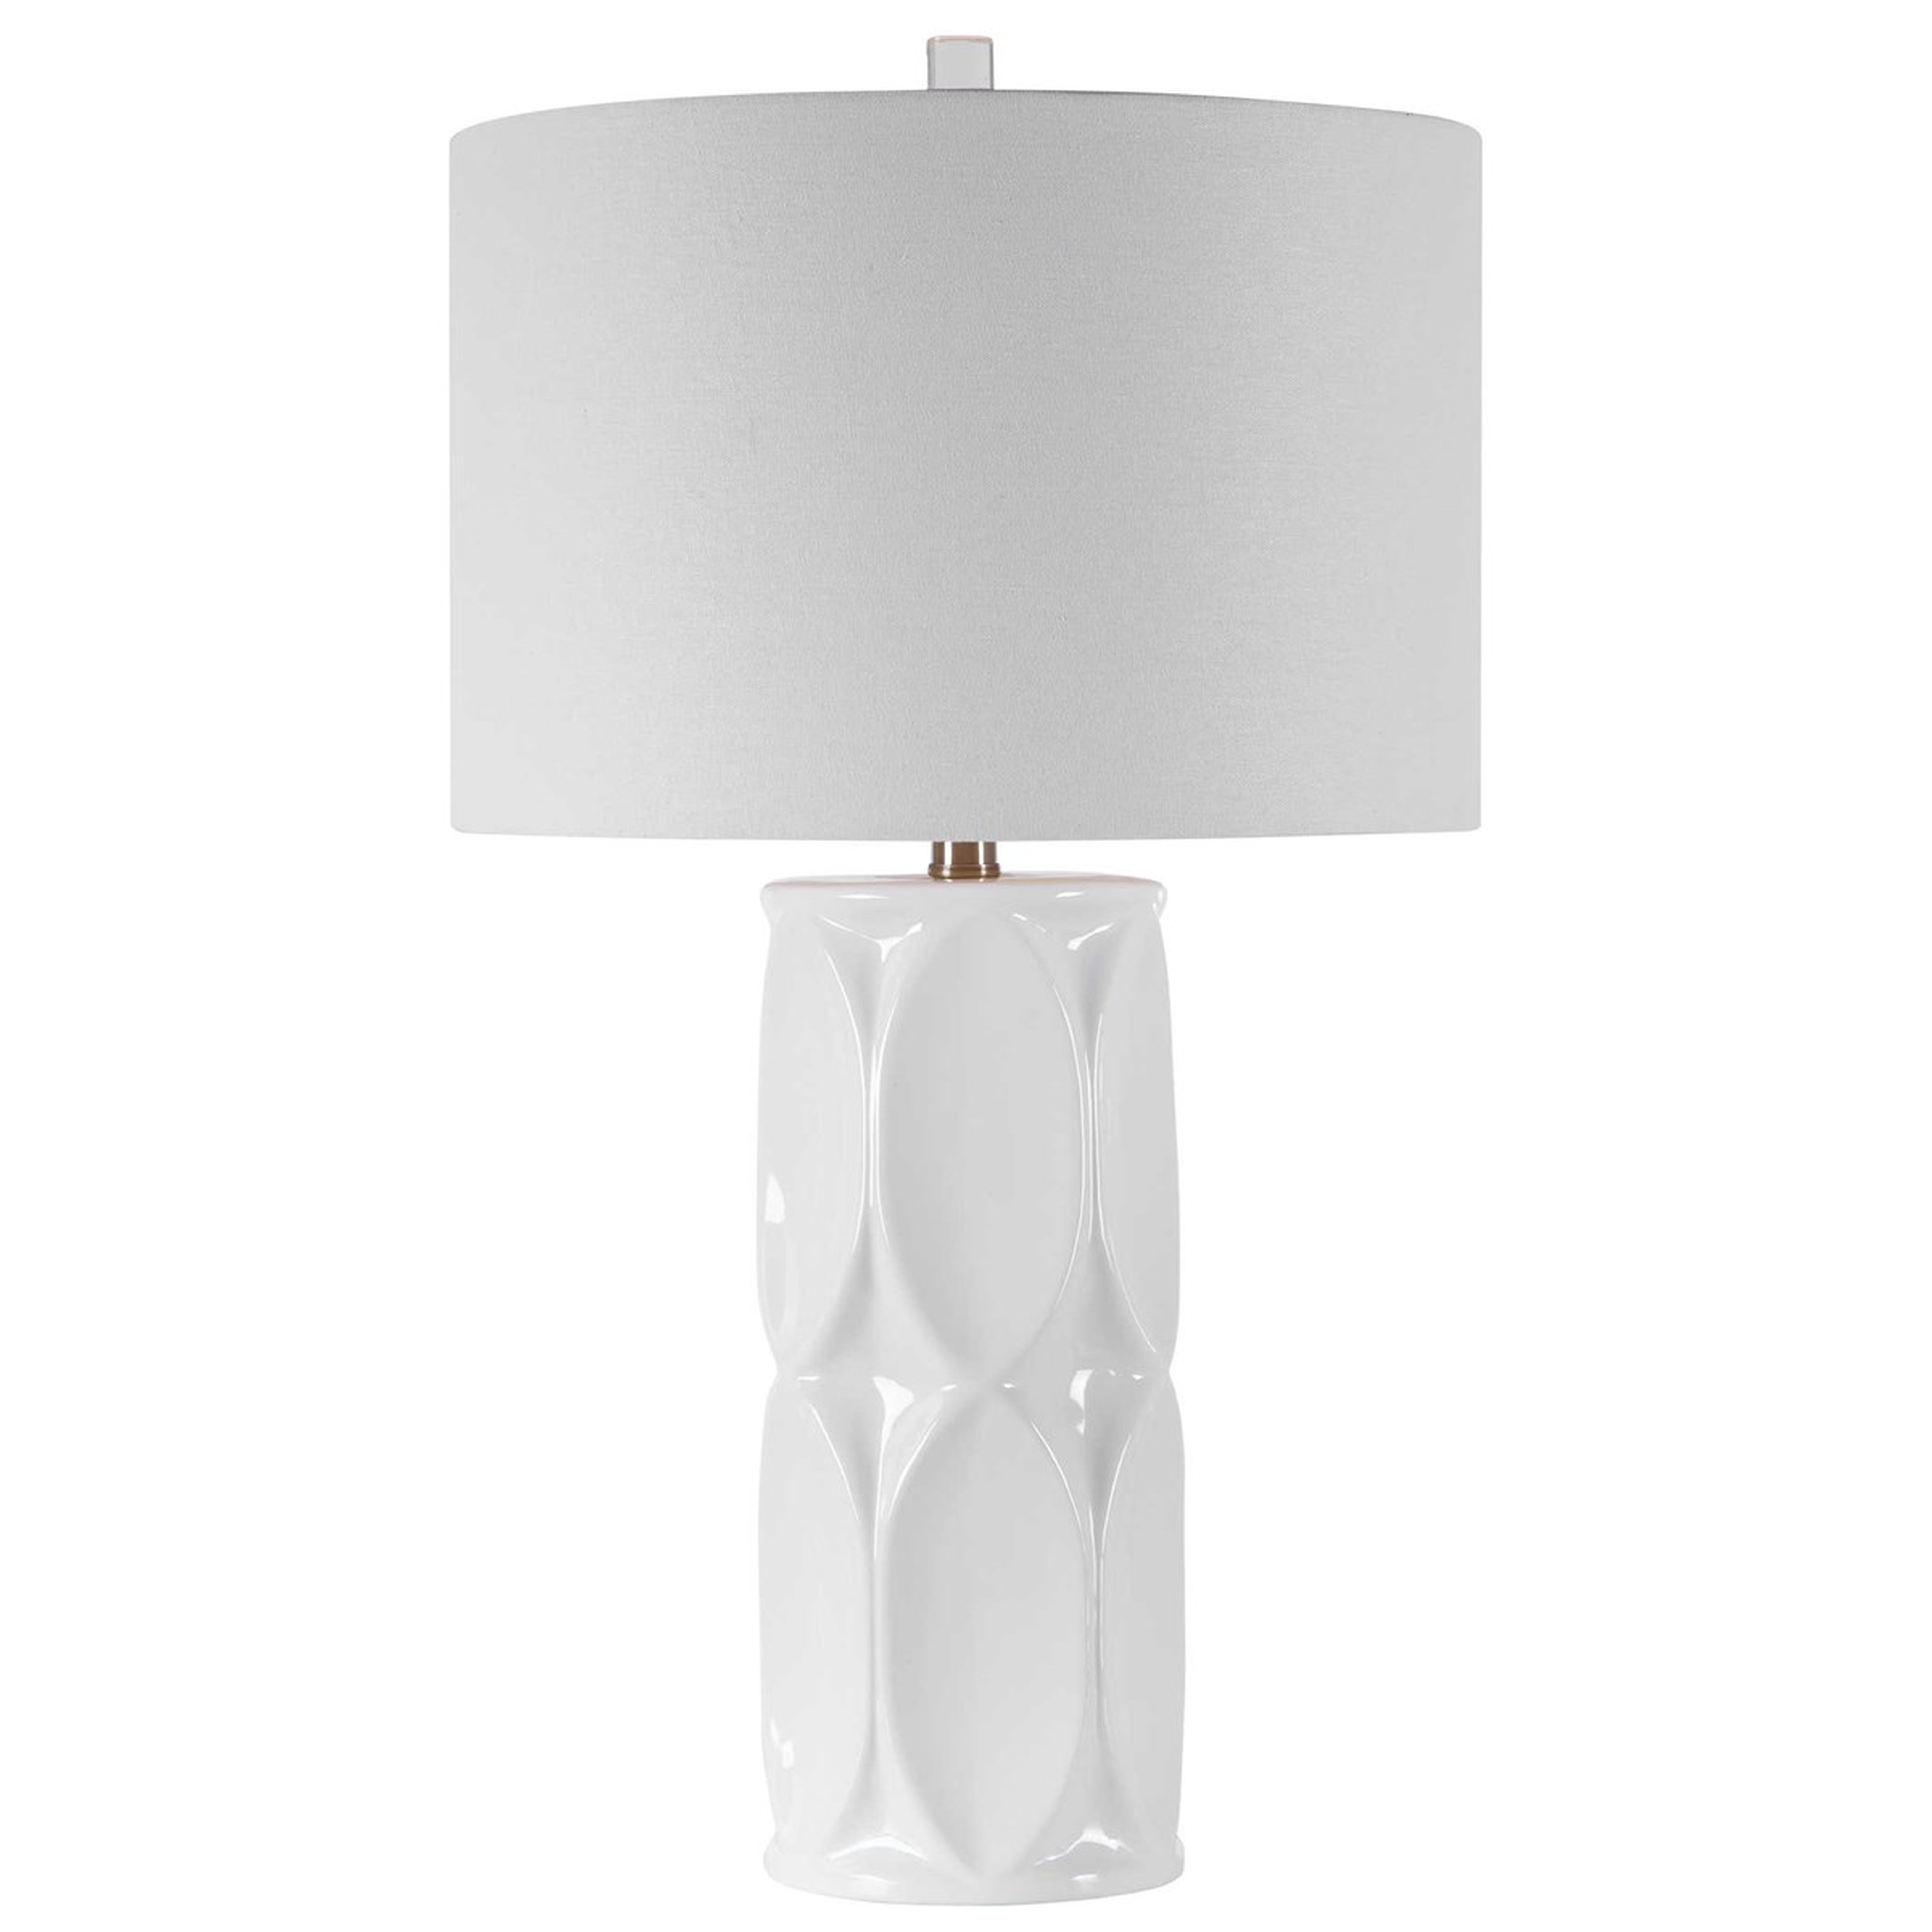 Sinclair White Table Lamp - Hudsonhill Foundry